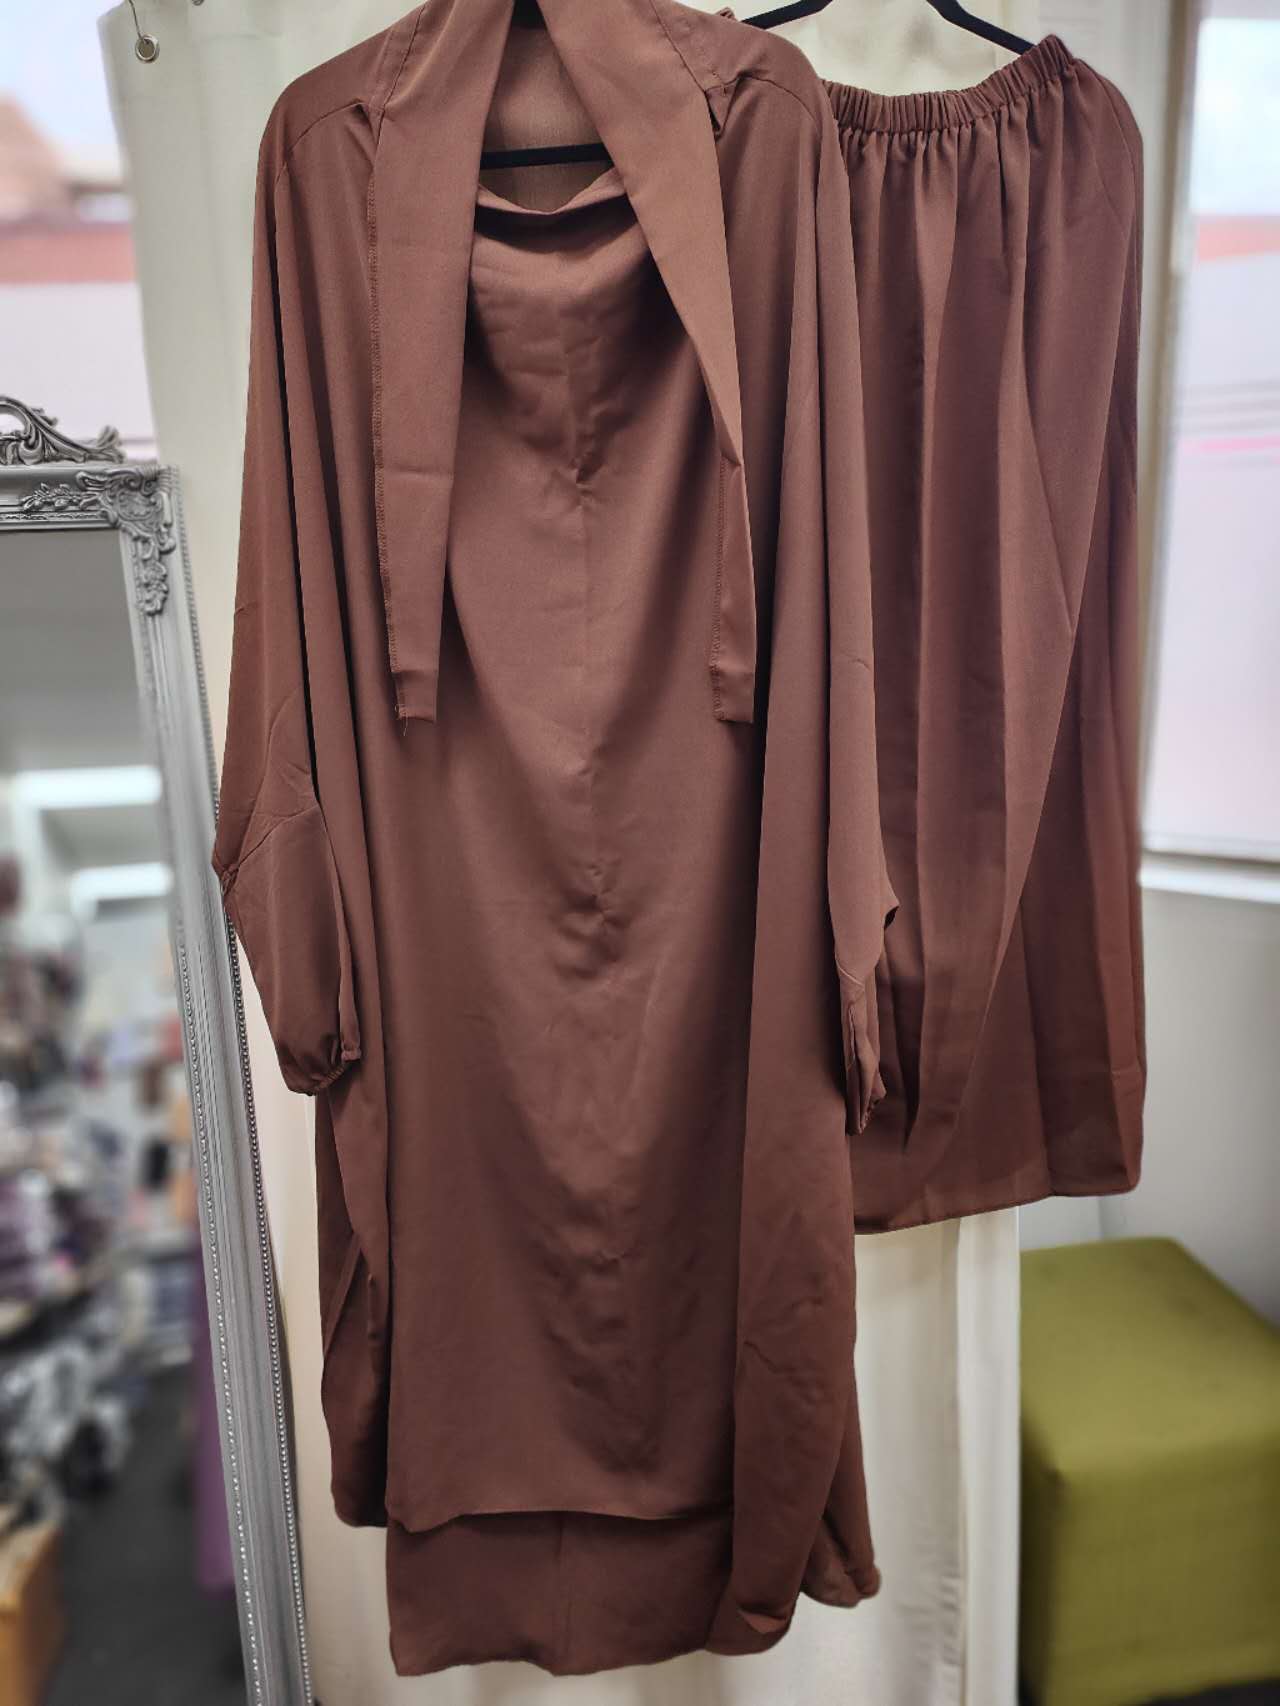 Discover timeless elegance with our Coffee Two-Piece French Jilbab. Hikmah Boutique brings you a blend of style and devotion, featuring a tie-up design, extra-long length for prayer, and versatile coffee hue. Shop now for affordable and stylish modest wear tailored exclusively for you.